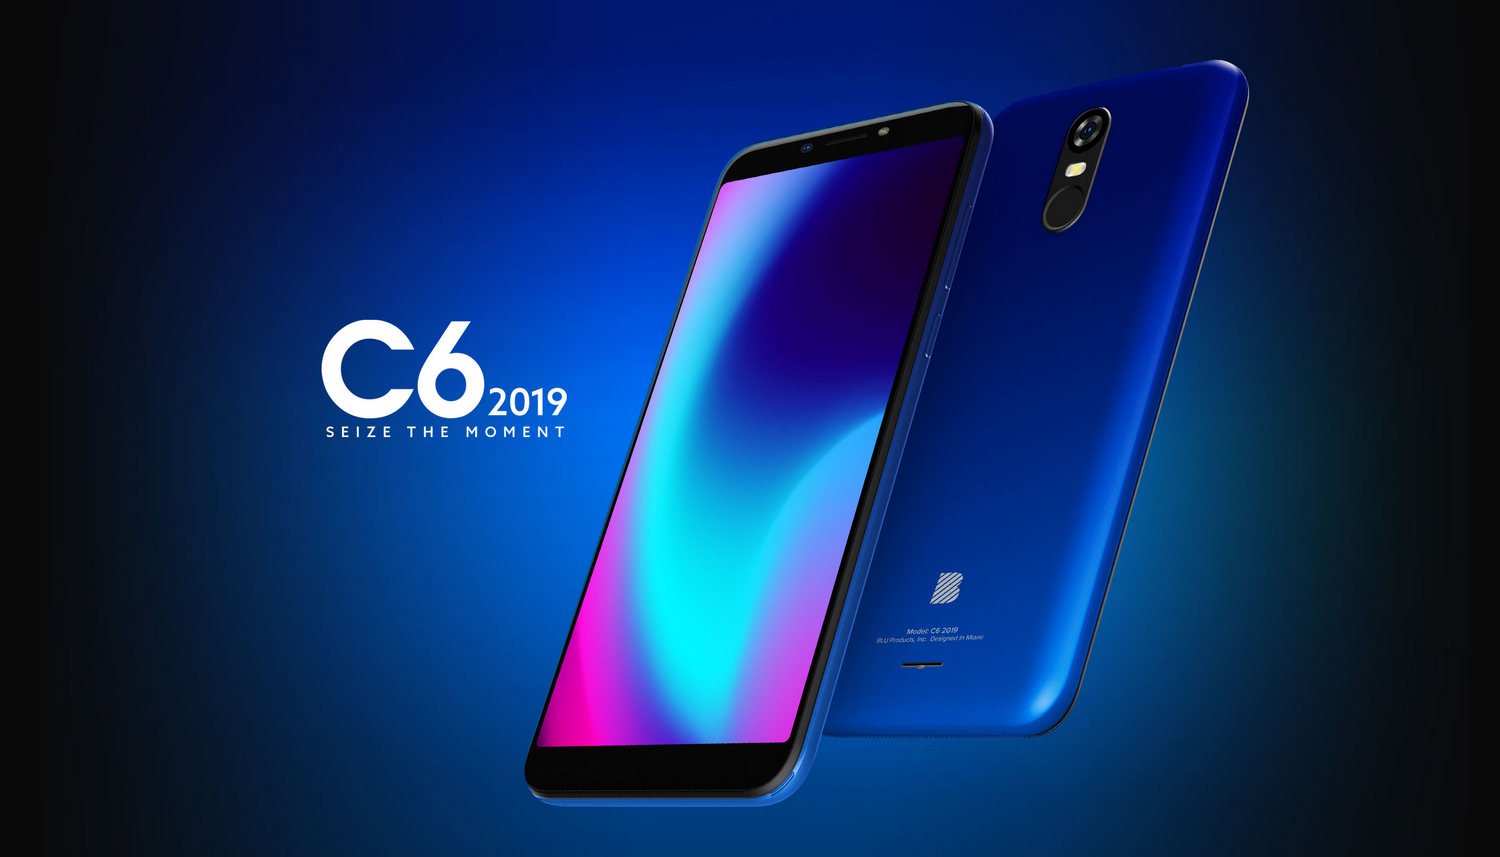 How To Fix BLU C6 2019 Not Charging [Troubleshooting Guide]